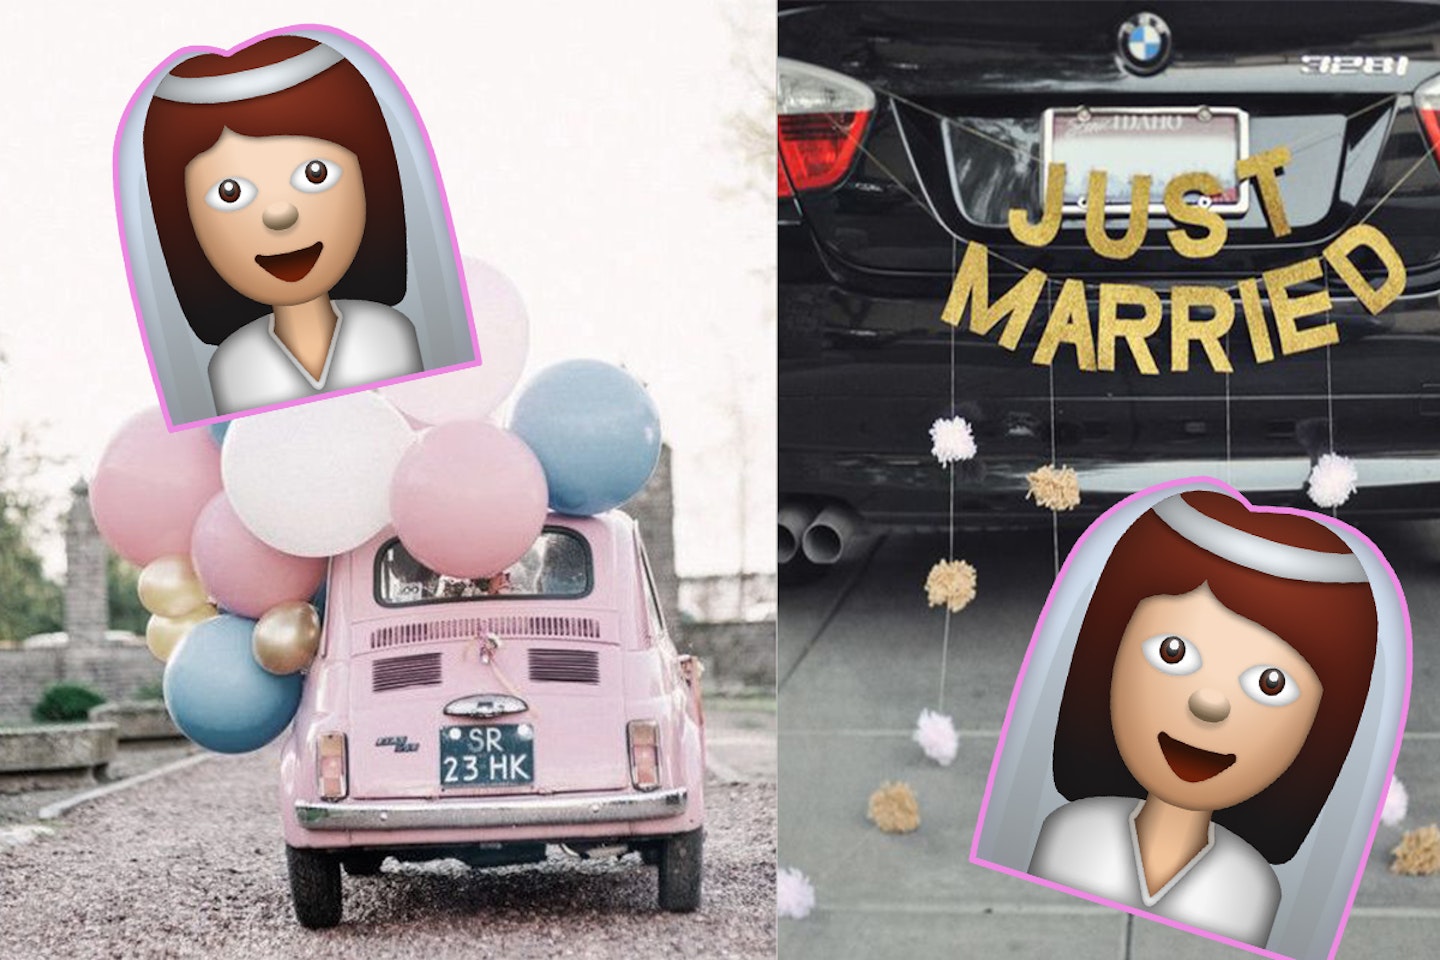 DIY Wedding Car Decoration Ideas - See Fun Ways To Decorate The Car That  The Married Couple Will Drive Away In